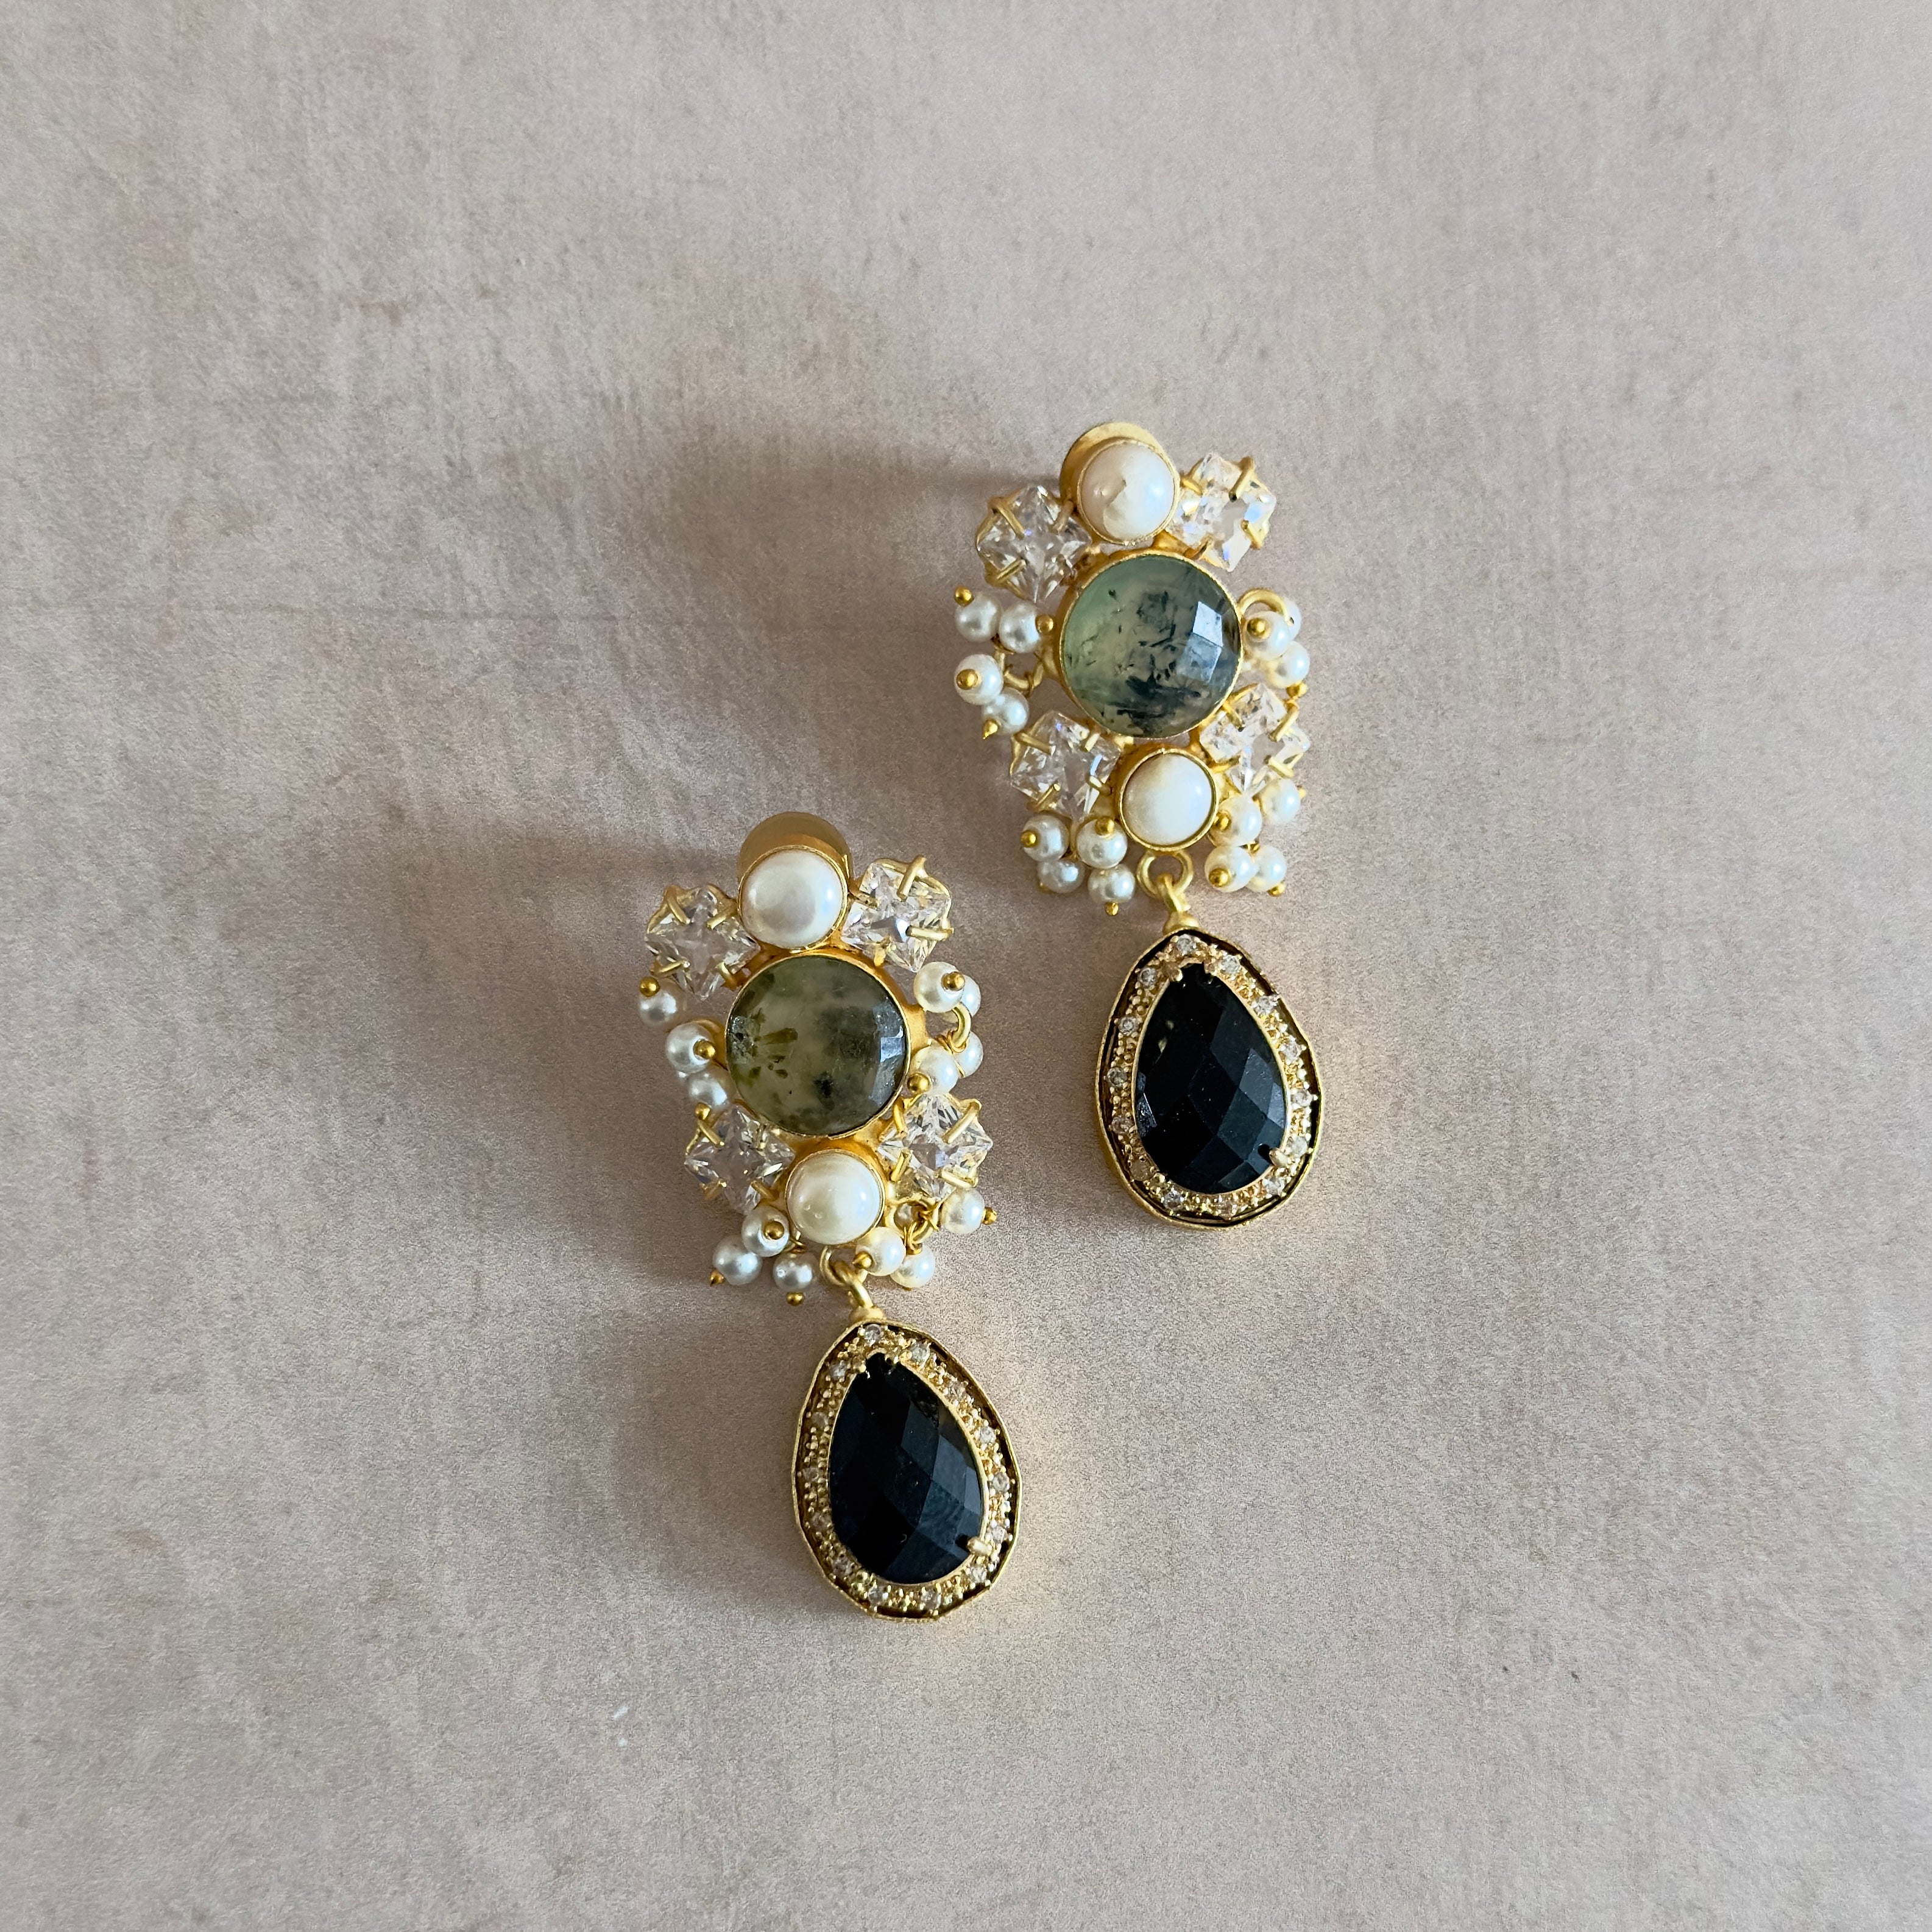 Add a touch of elegance to any outfit with our Lela Black Pearl Earrings! These stunning multi gemstone earrings feature sparkling CZ crystals, bringing a touch of glamour and sophistication to your look. Perfect for any occasion, these earrings are sure to make a statement and elevate your style.